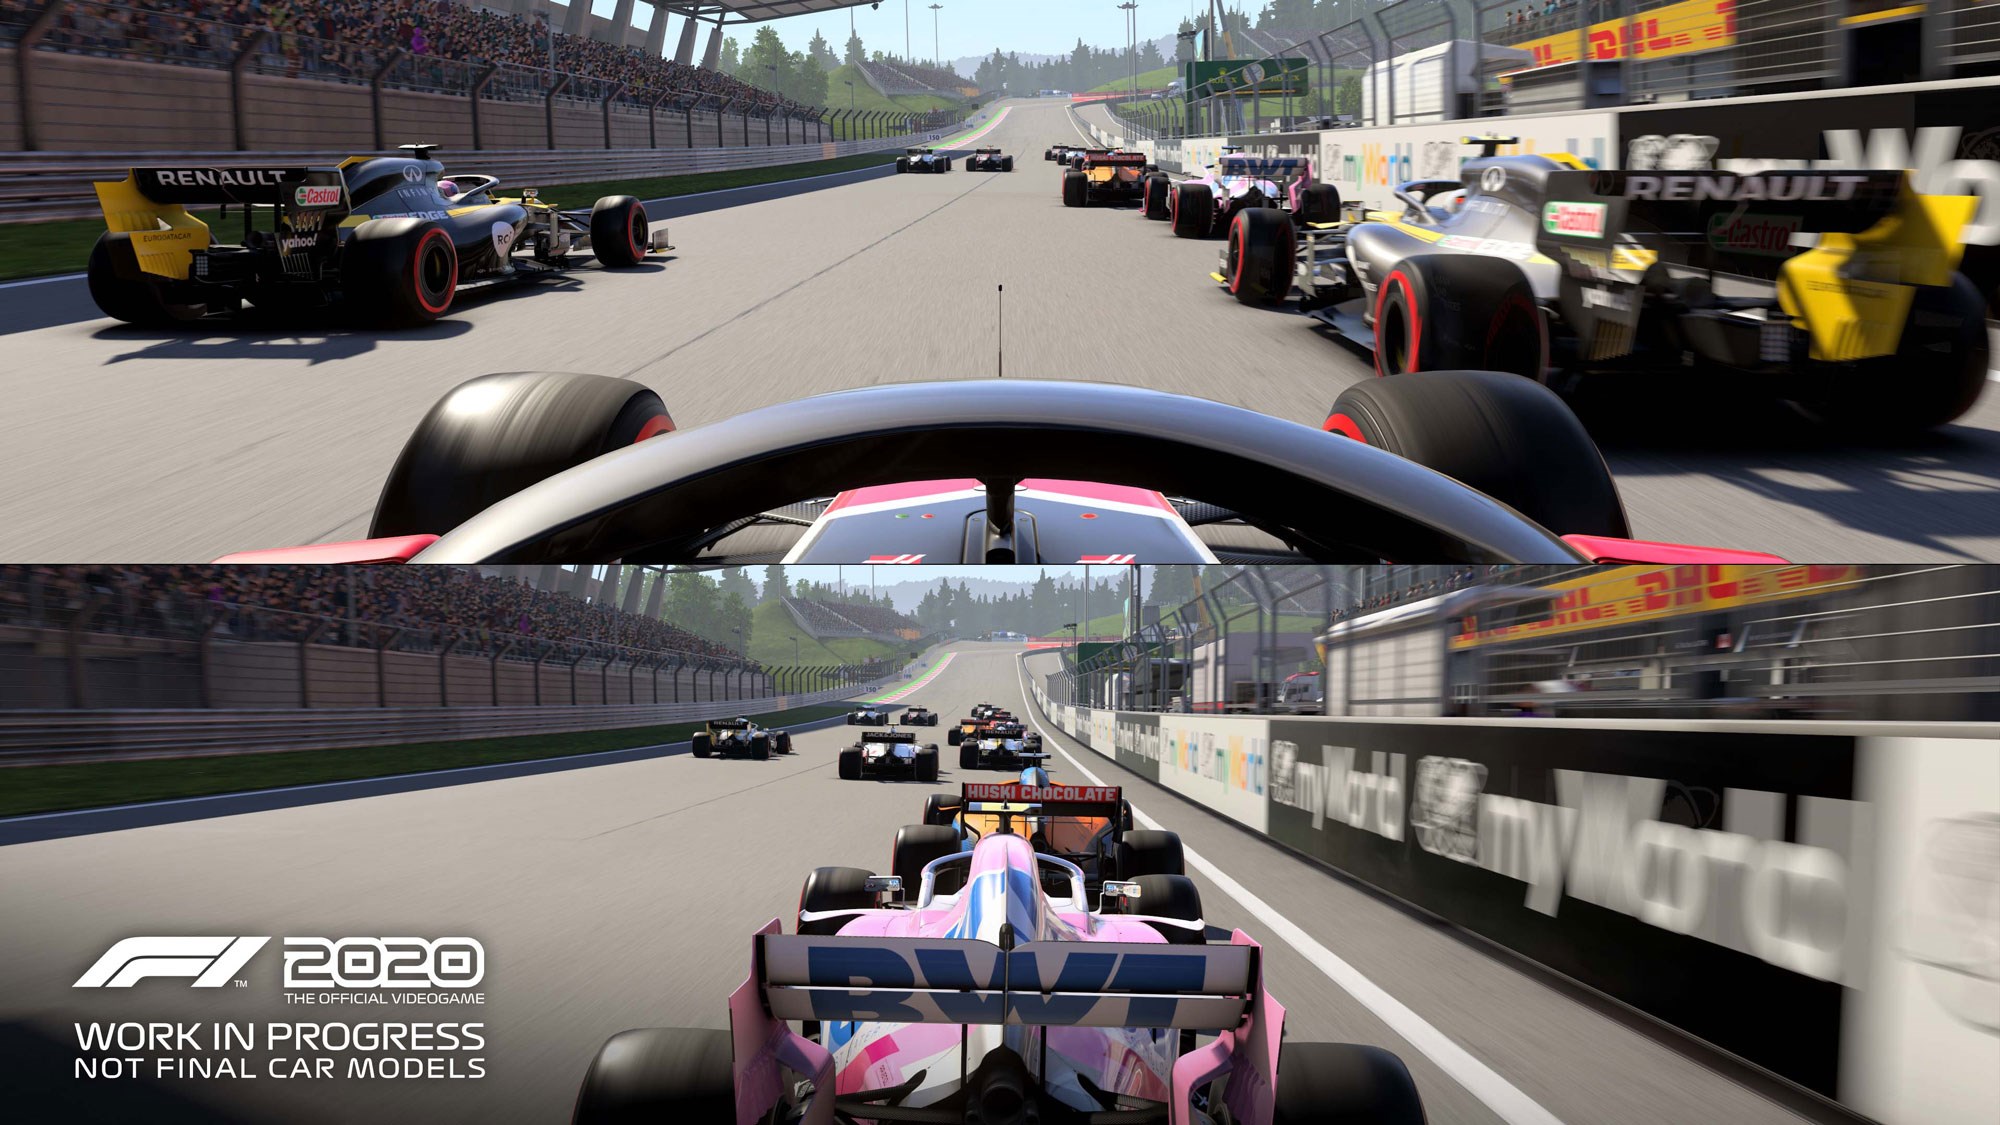 hierarki Slid Marco Polo F1 2020 game review: a significant upgrade | CAR Magazine